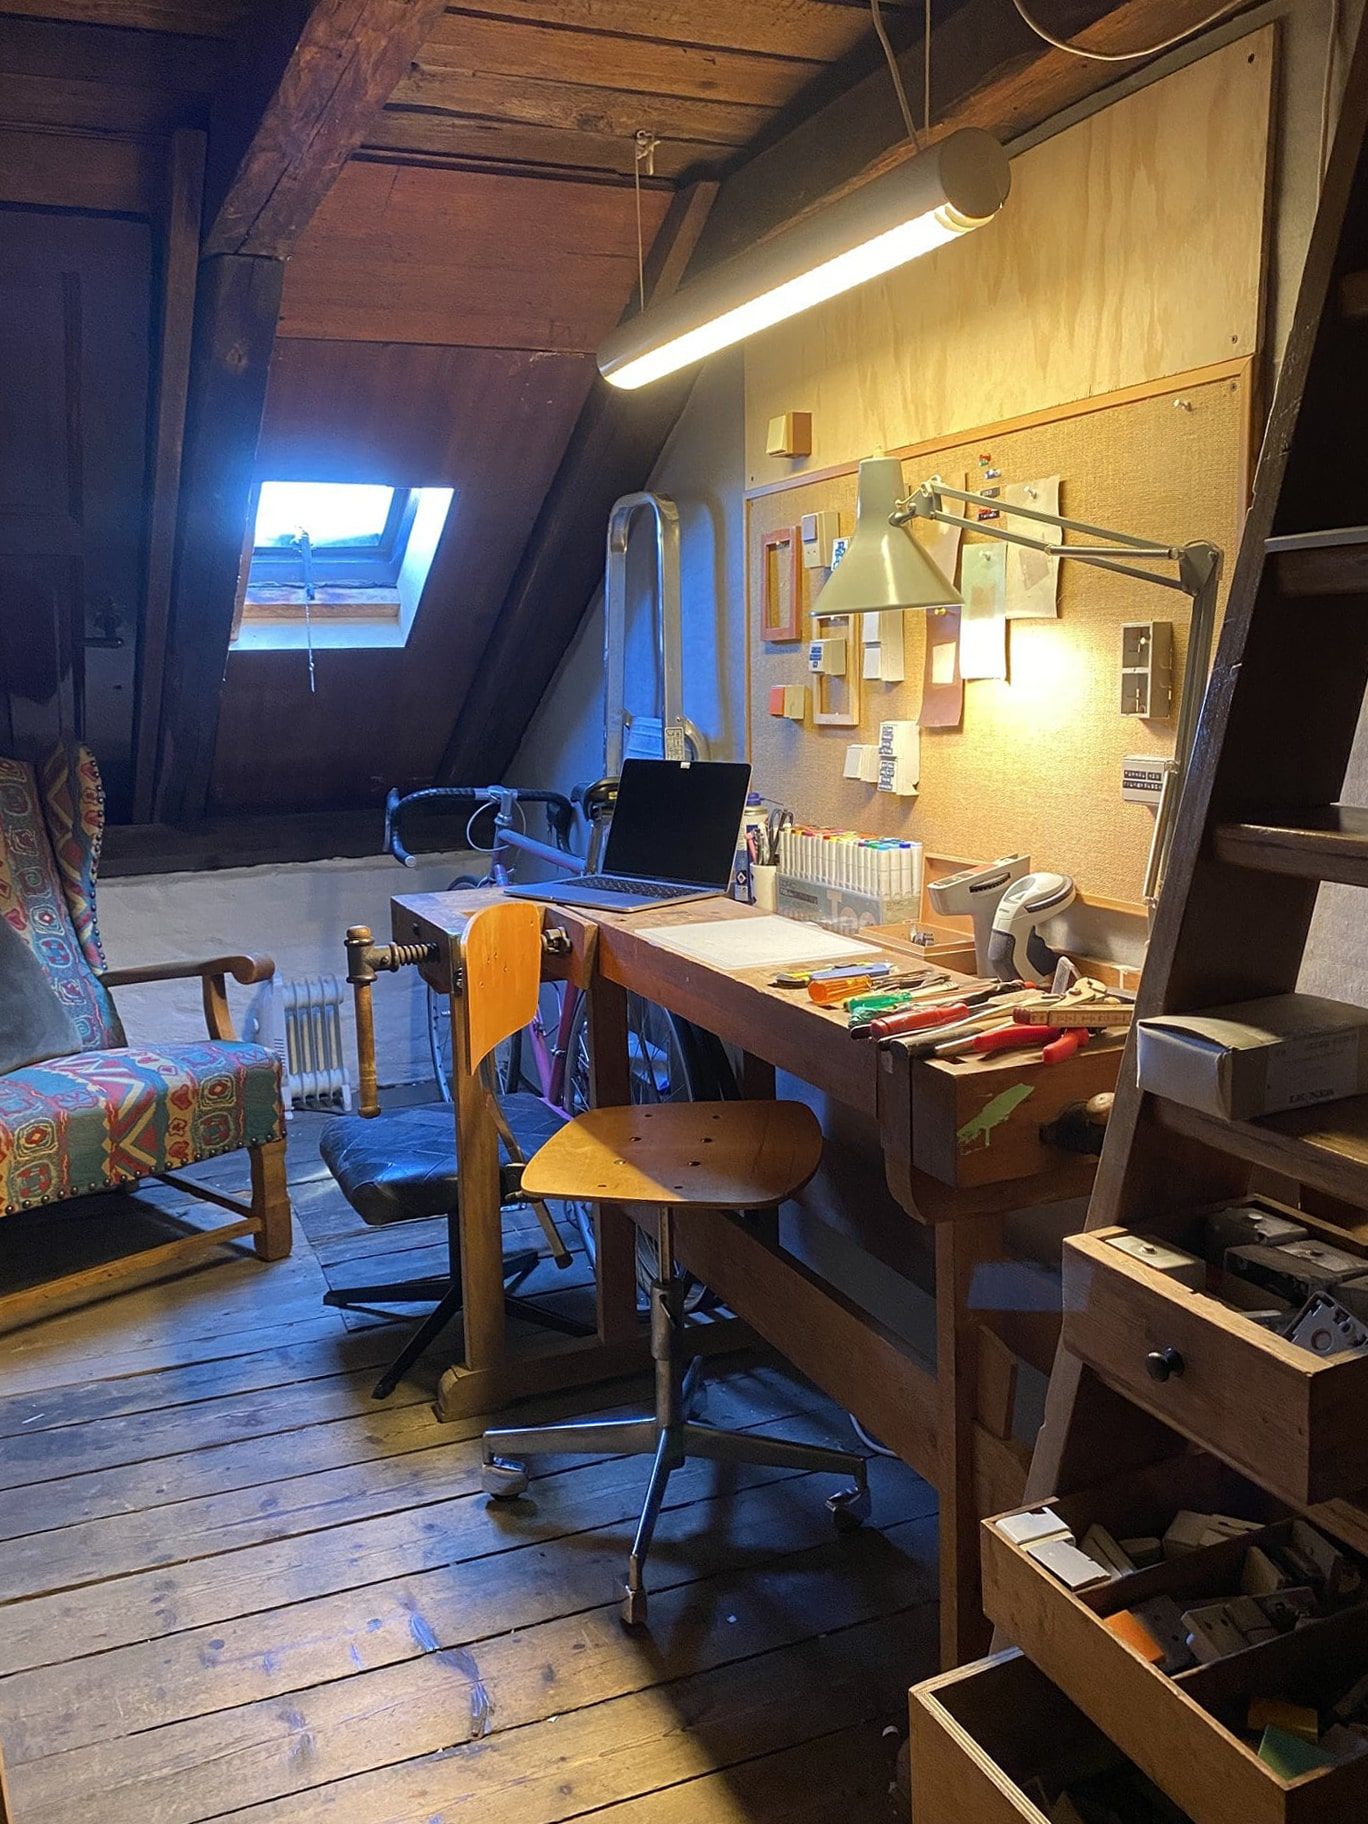 A rustic attic workspace with a laptop and a lot of artistic tools on a wooden desk. There is also a lamp on the desk and a skylight window in the roof